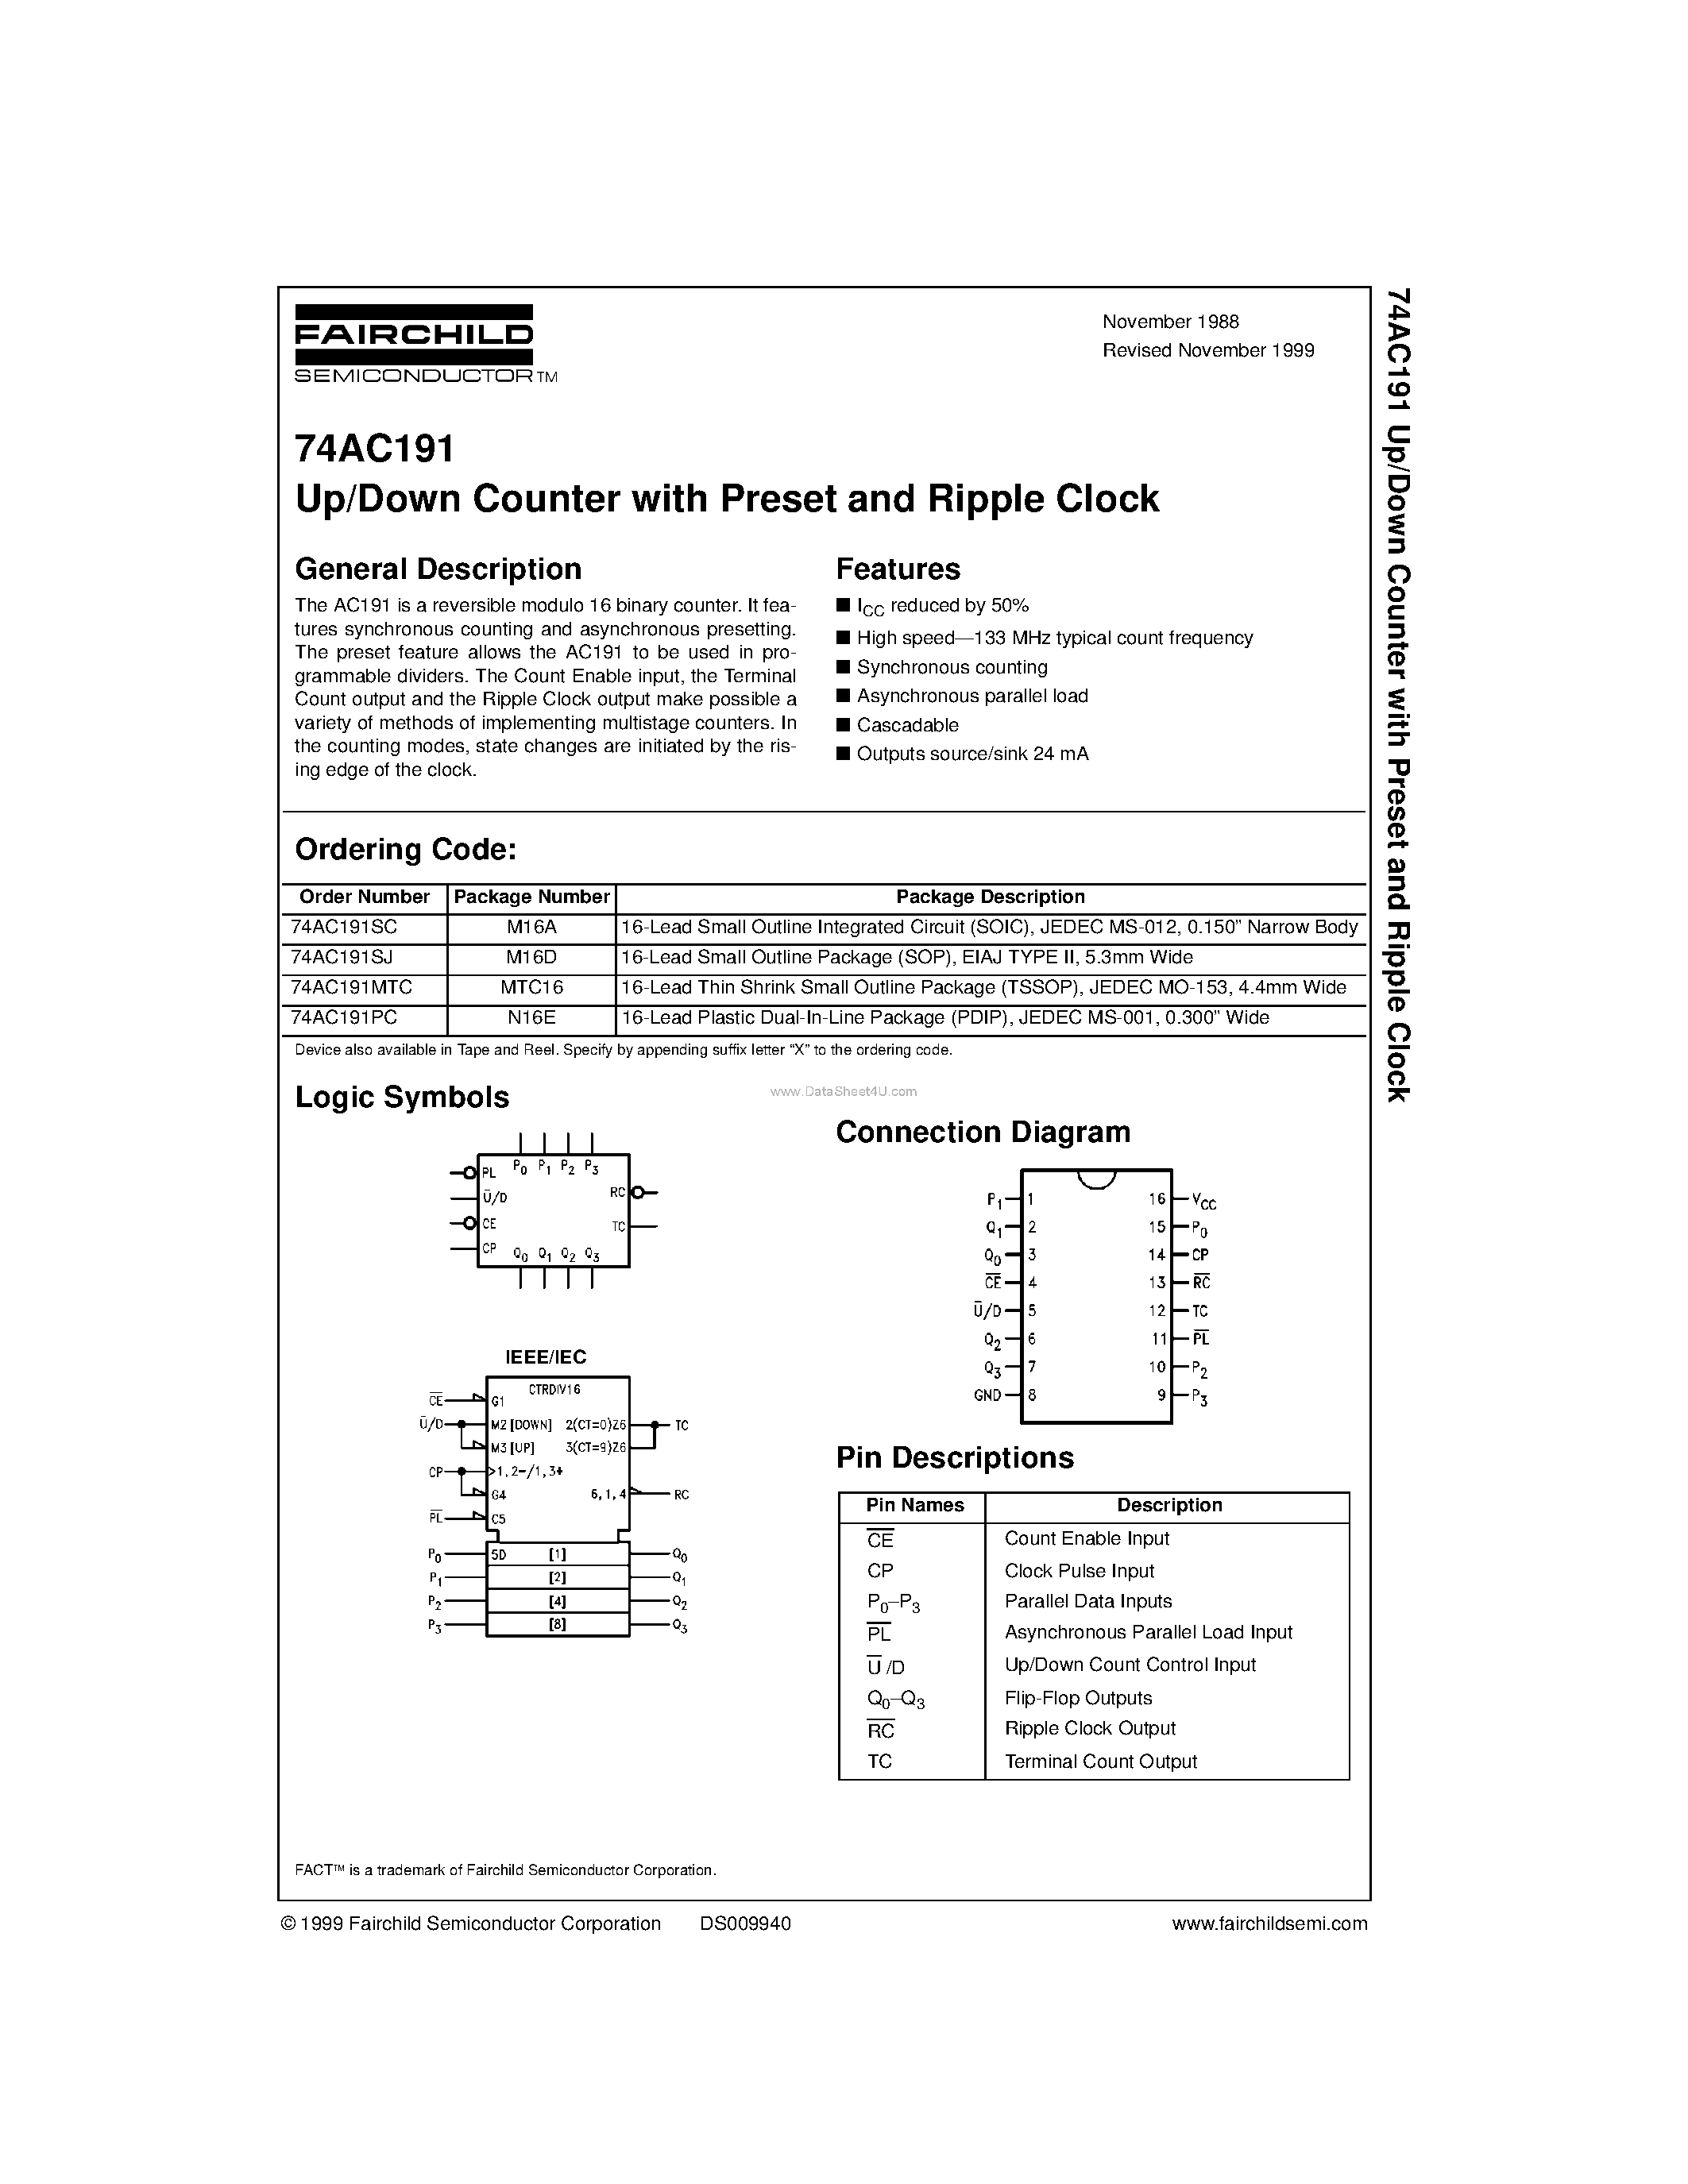 Datasheet 74AC191SJ - Up/Down Counter with Preset and Ripple Clock page 1